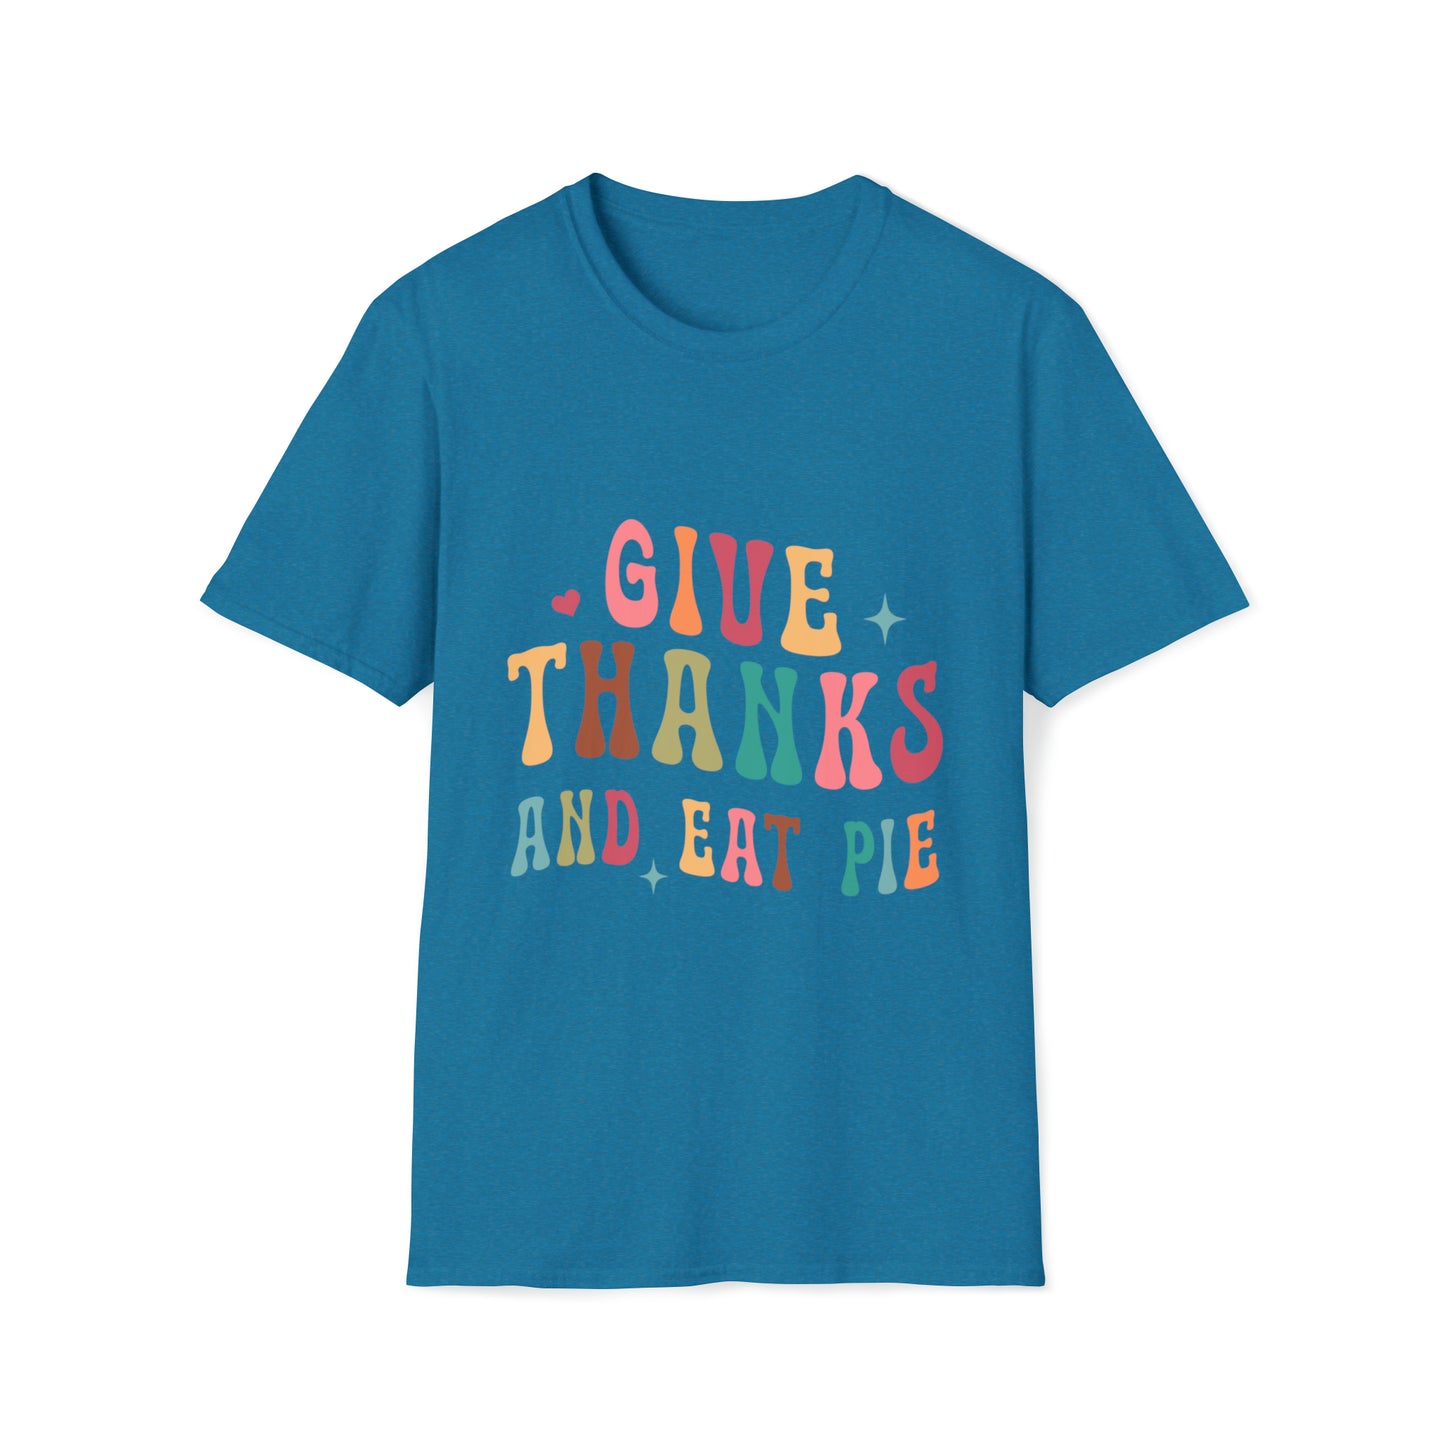 Give Thanks and Eat Pie - Unisex Softstyle T-Shirt